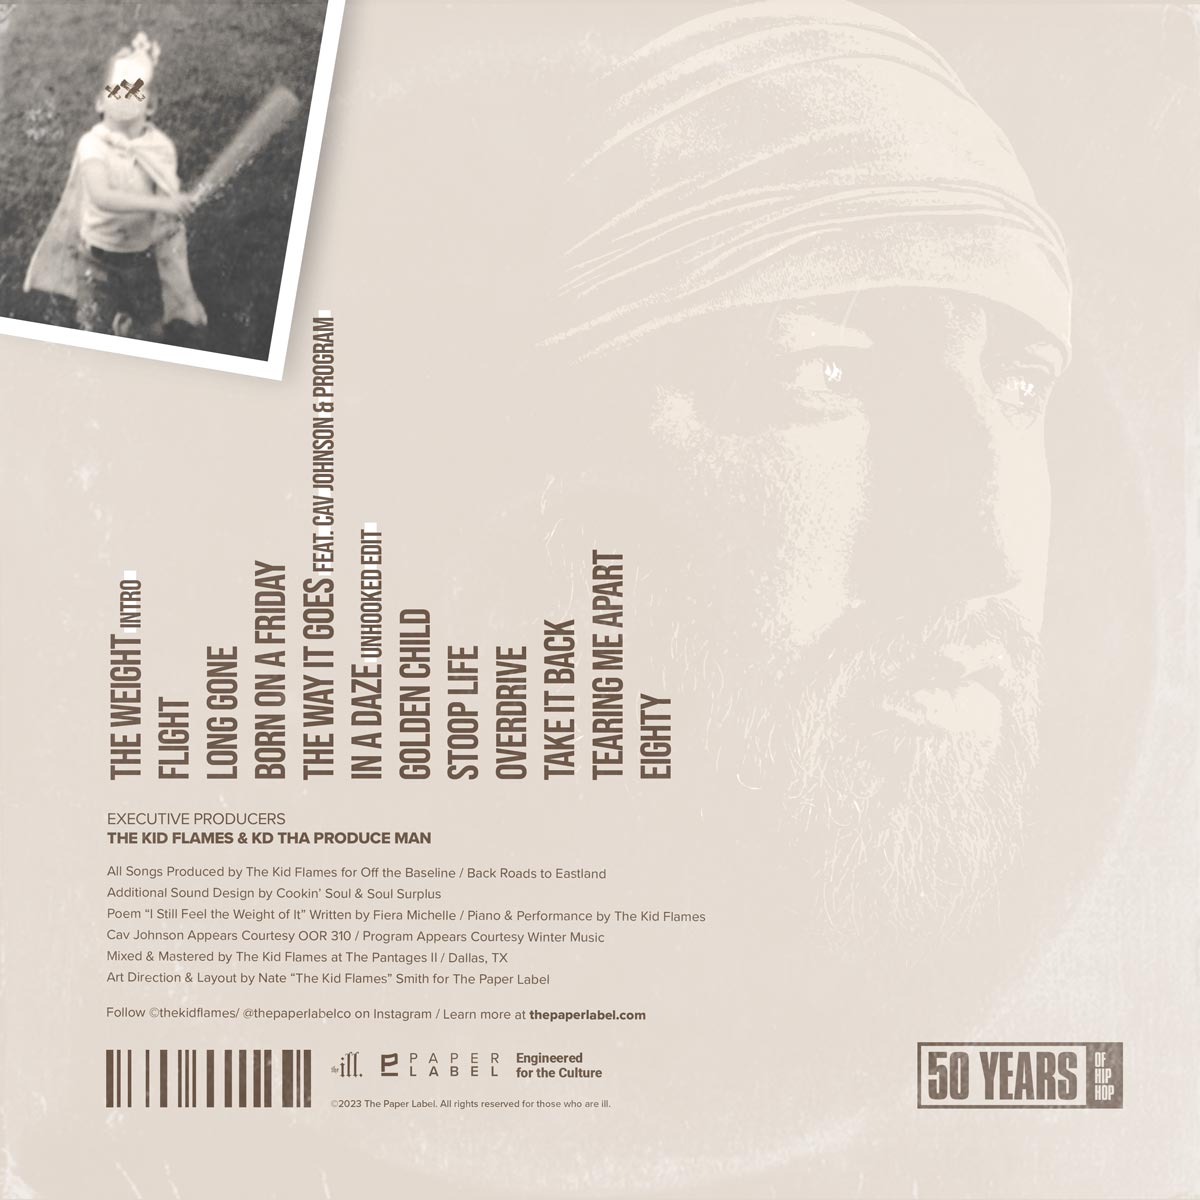 The Kid Flames Golden Child back artwork featuring track listing, credits, and photos of the artist.